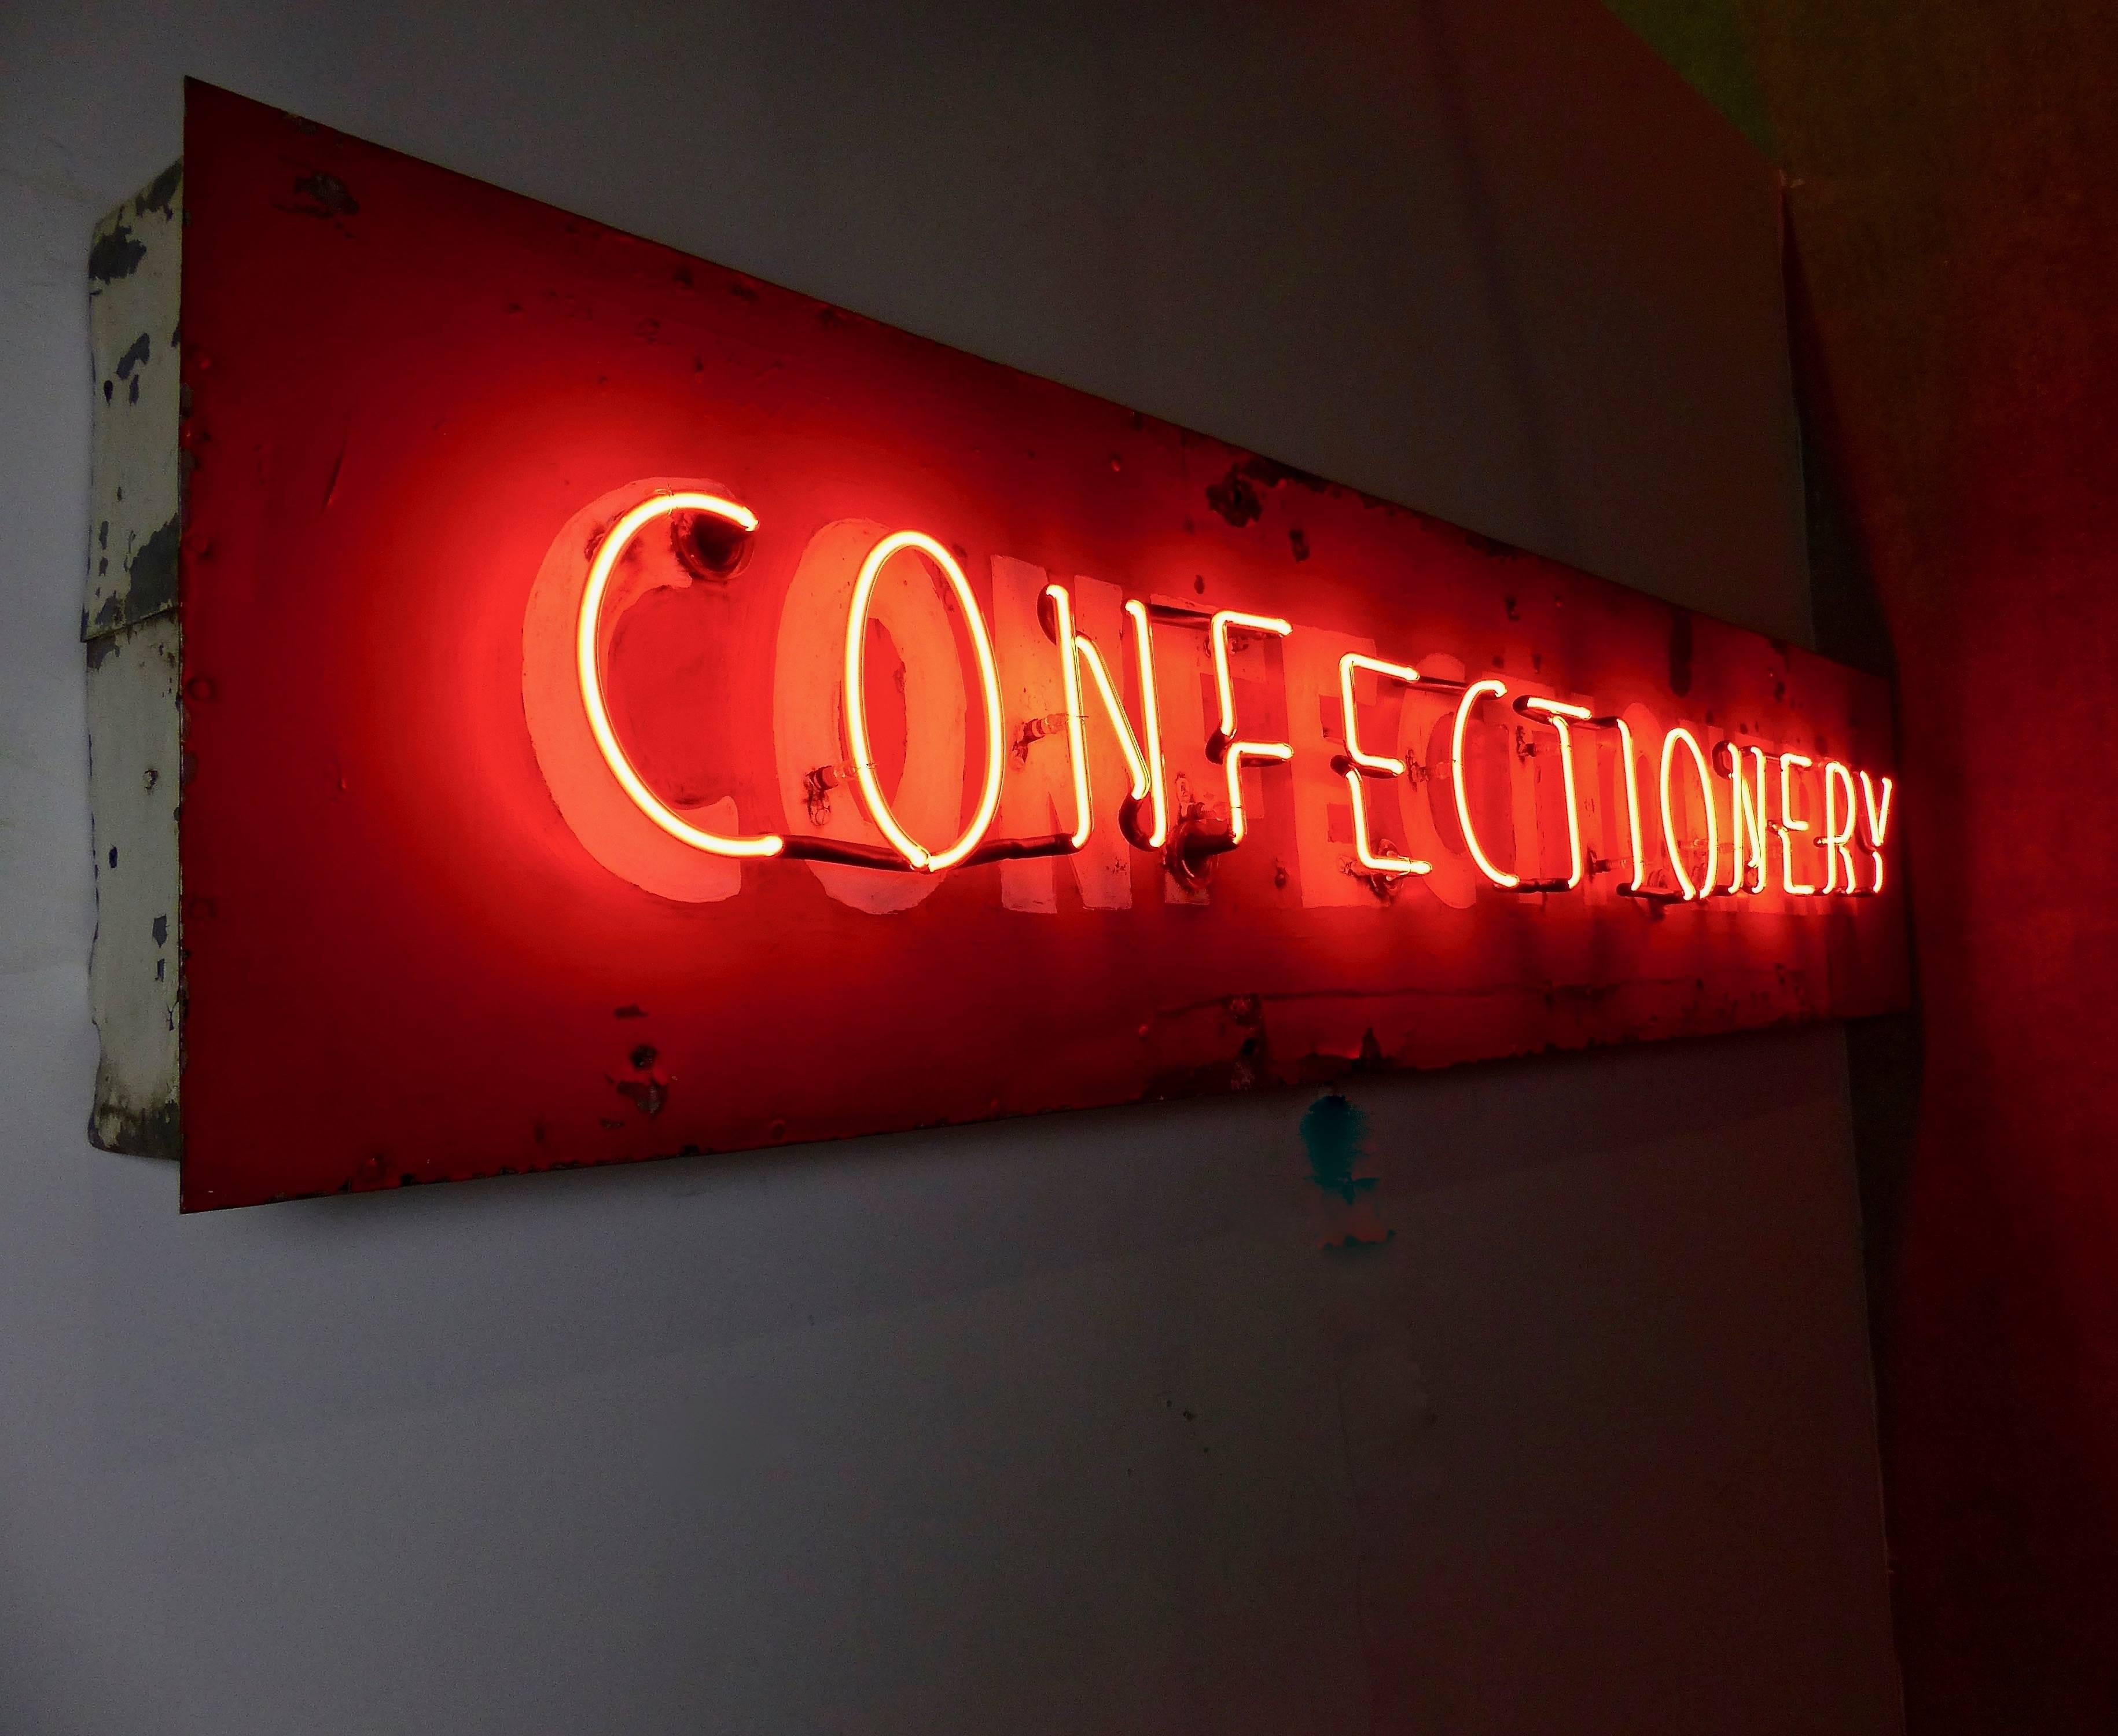 American 1940s Classic Neon “Confectionery” Sign in Red-Painted Metal